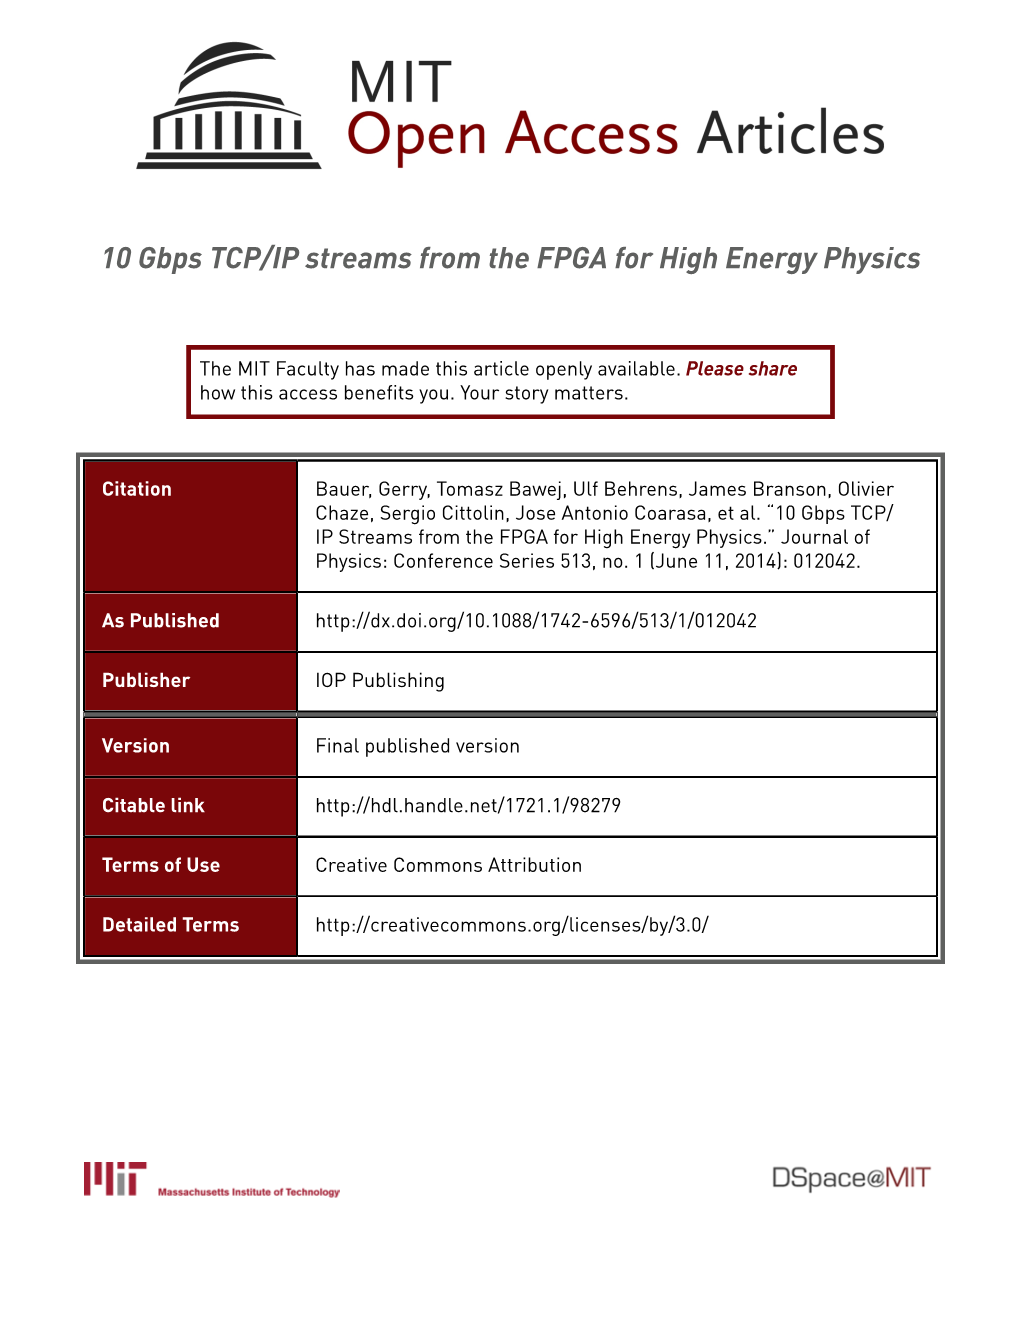 10 Gbps TCP/IP Streams from the FPGA for High Energy Physics